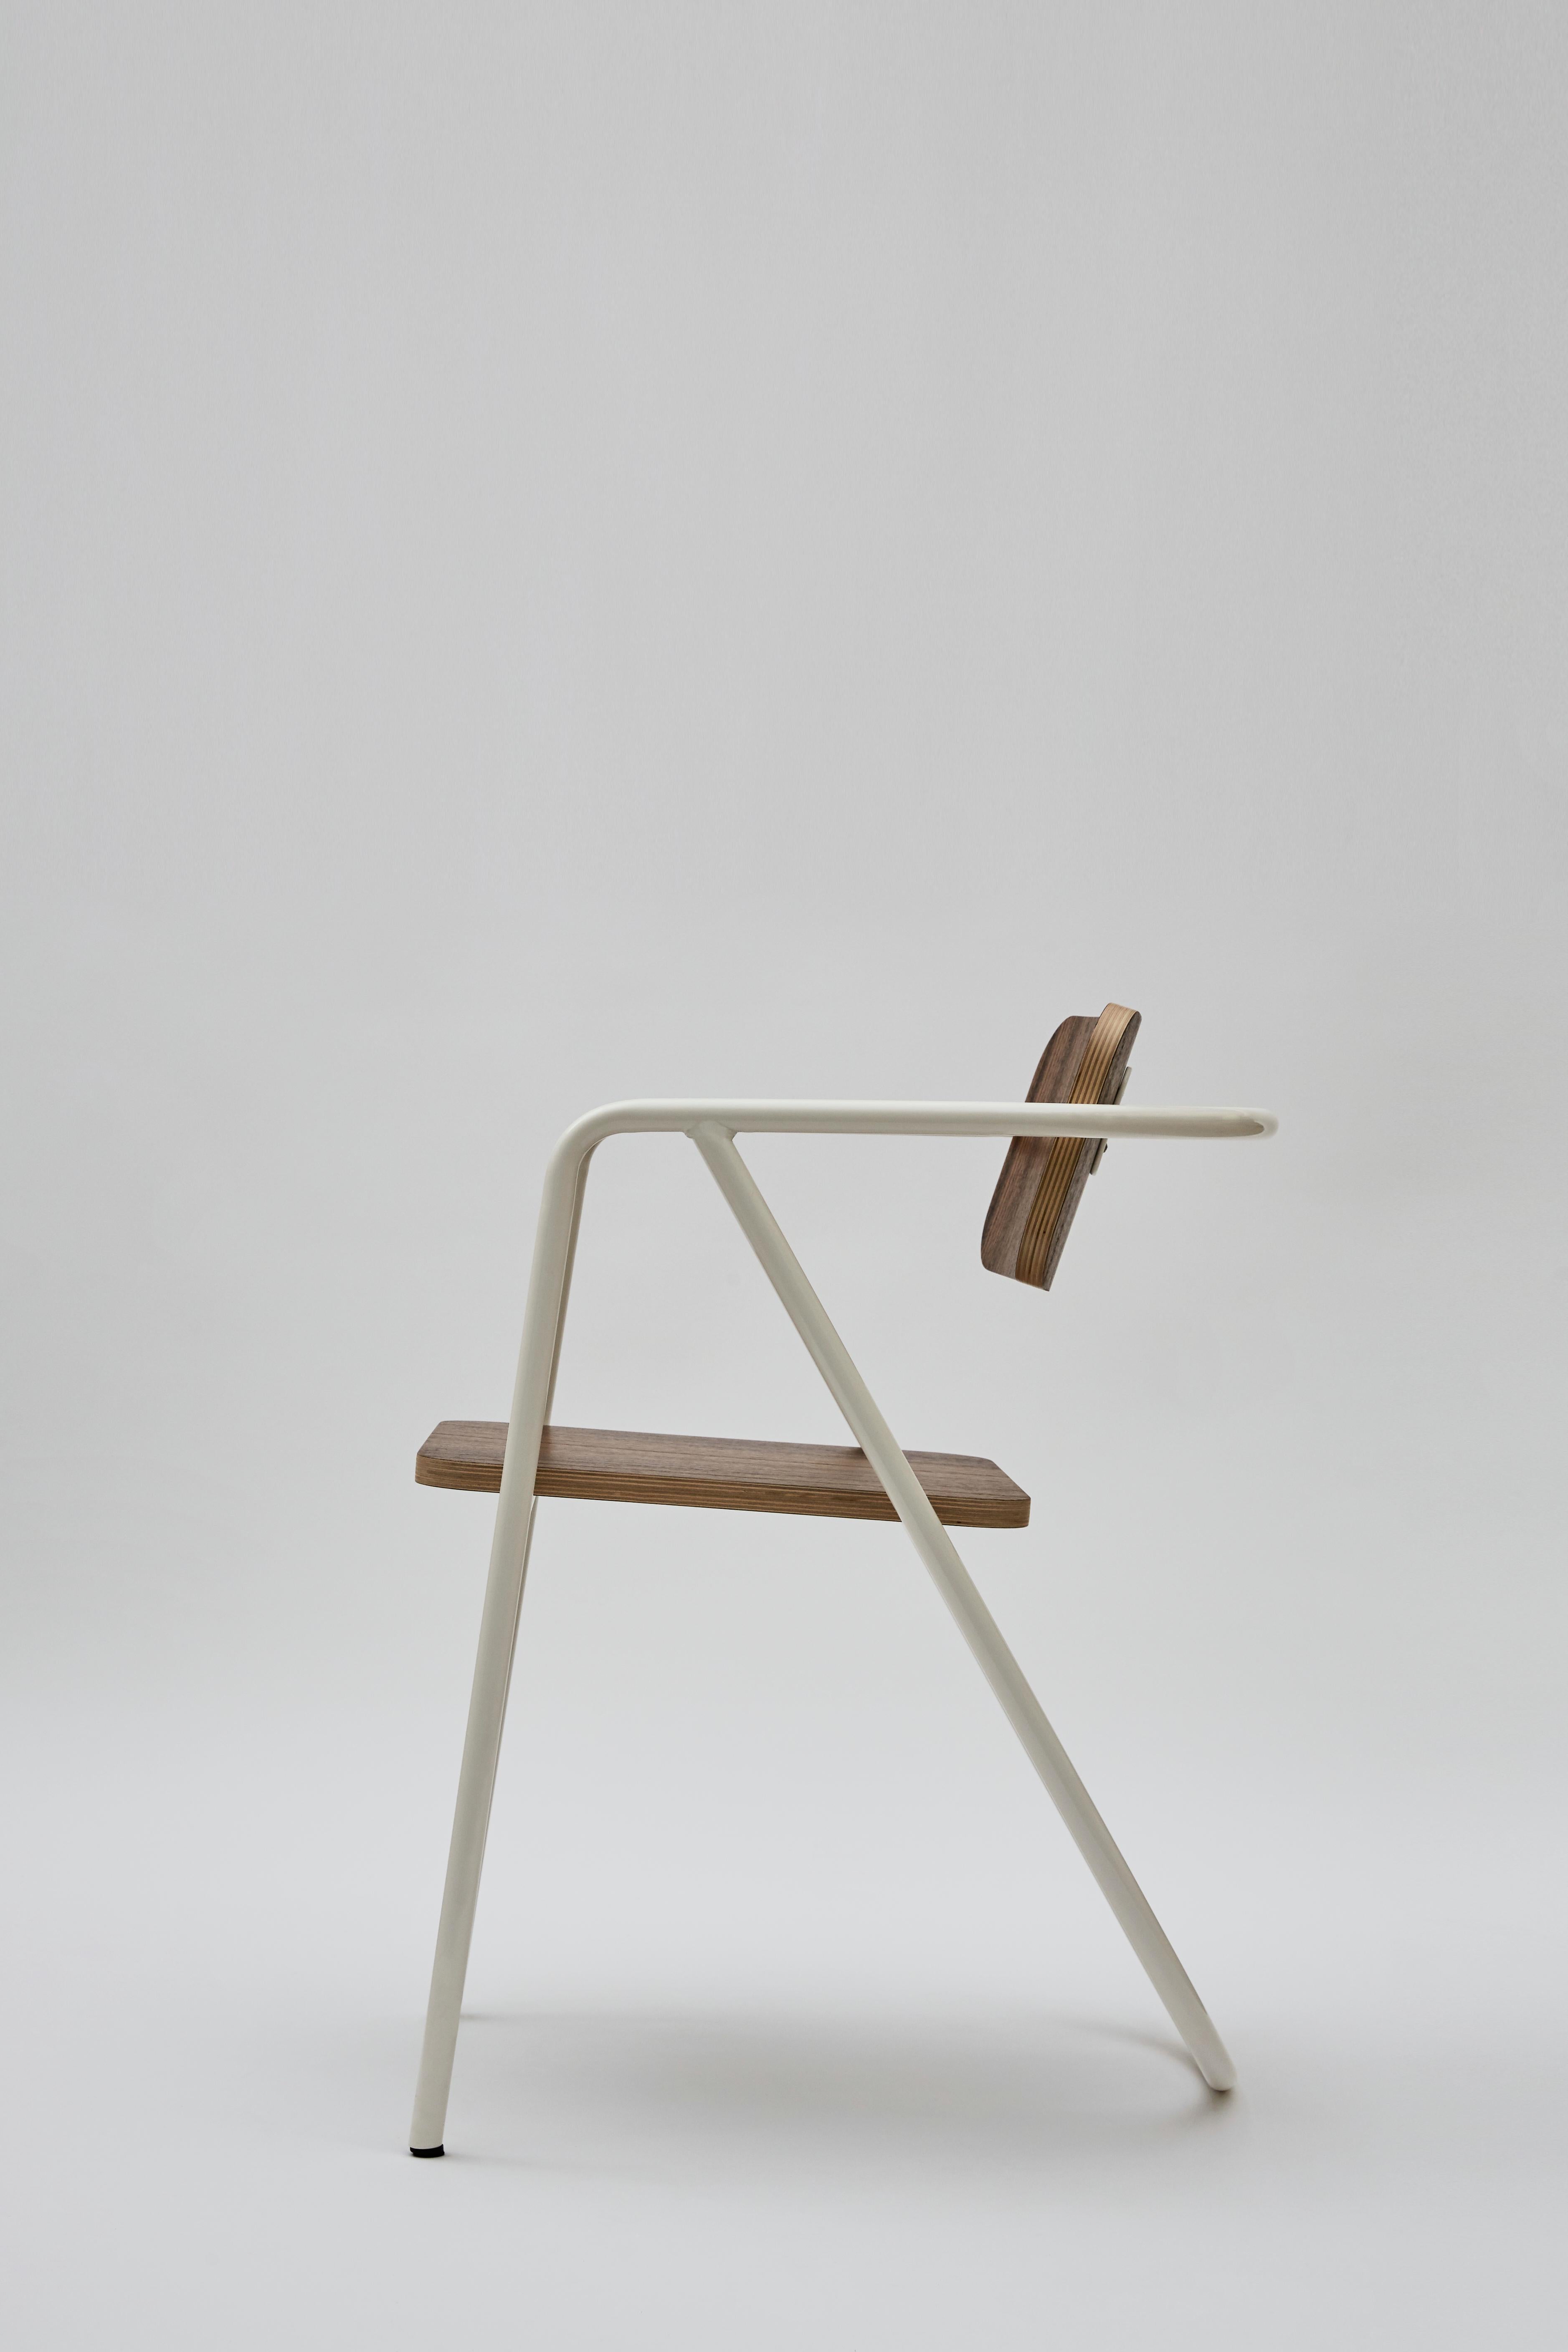 Other La Misciù Chair, White and Dark Wood For Sale